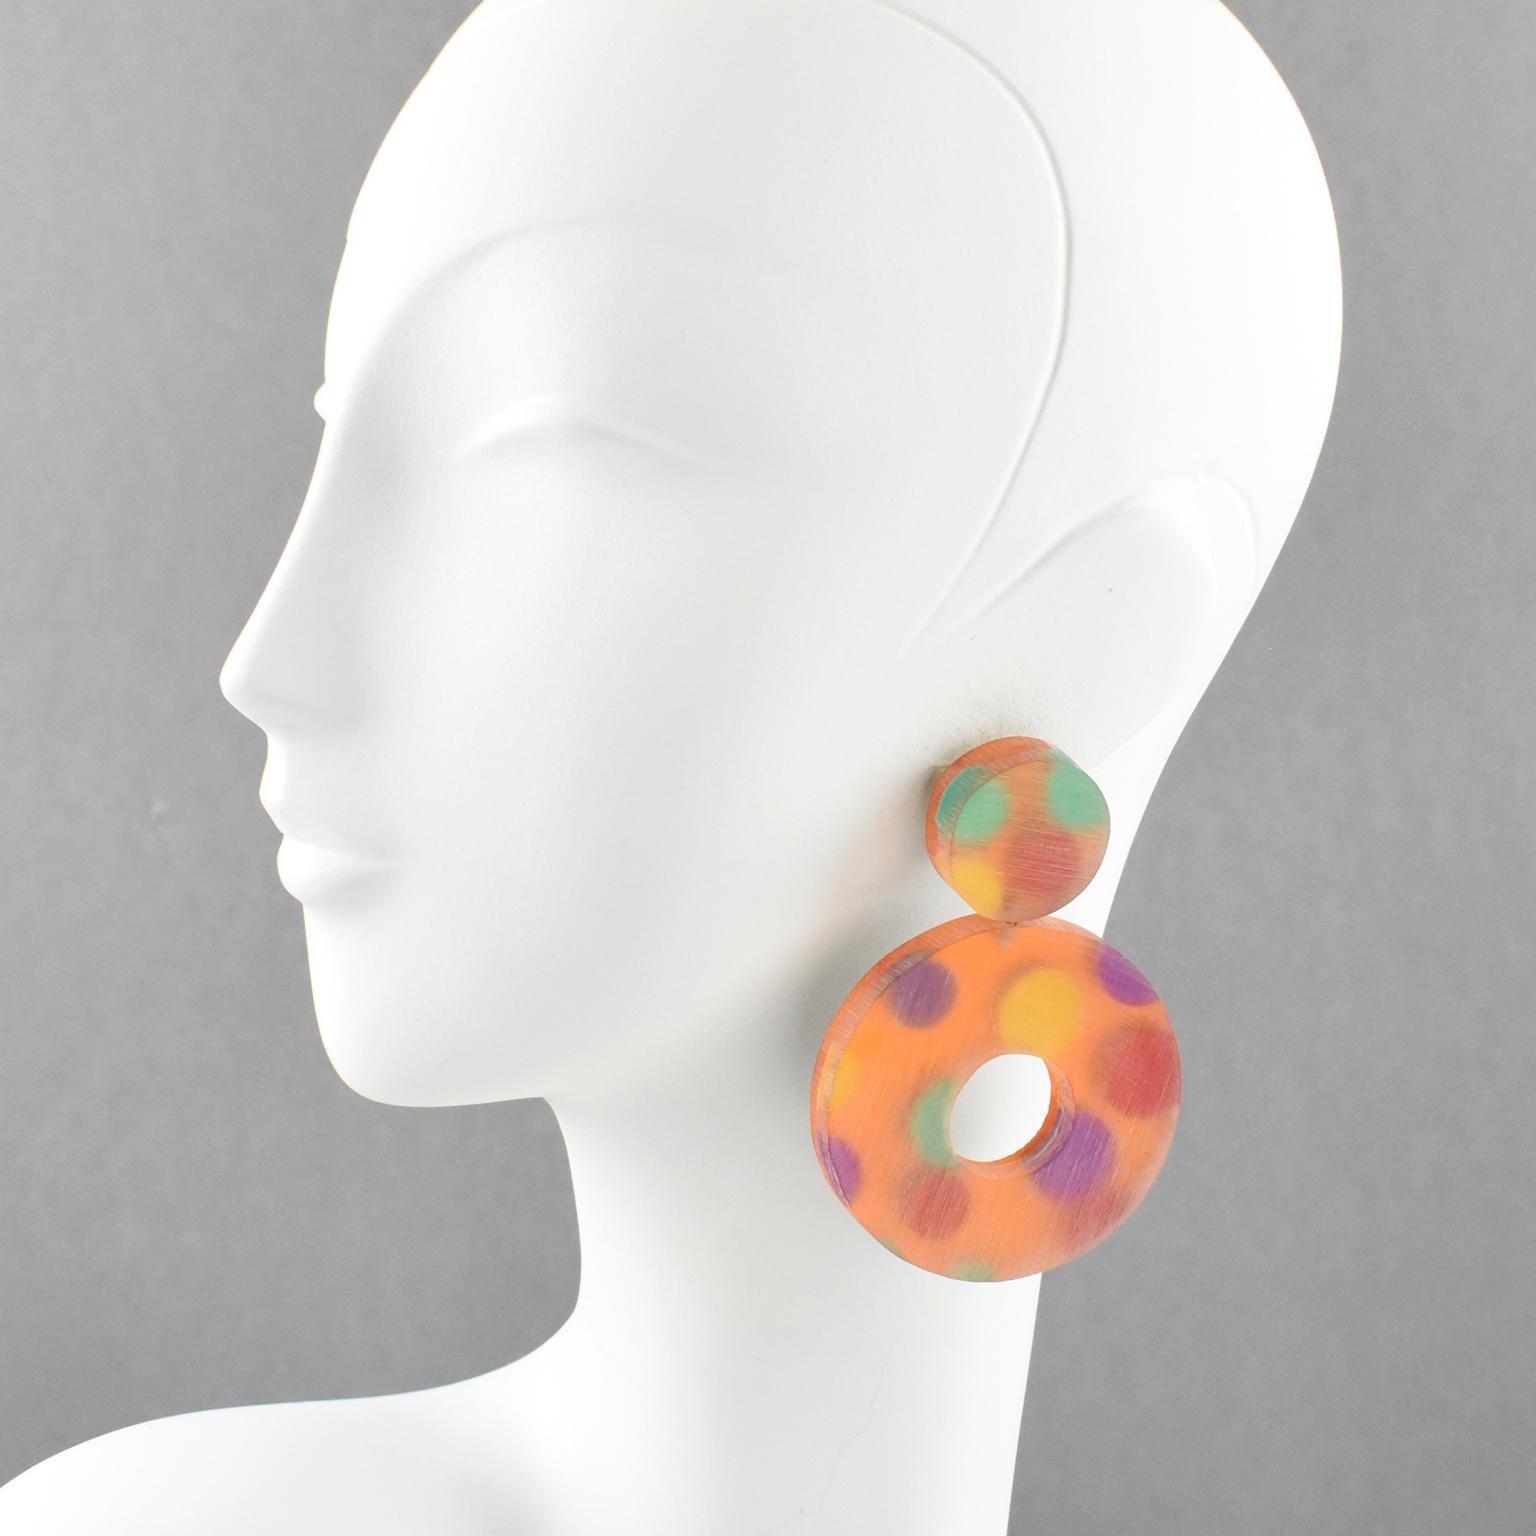 Spectacular oversized Lucite dangling clip-on earrings designed by Harriet Bauknight for Kaso. Large dangling shape with donut design featuring dimensional multilayers Lucite with colorful polka dot inclusions. Assorted bright colors of purple,